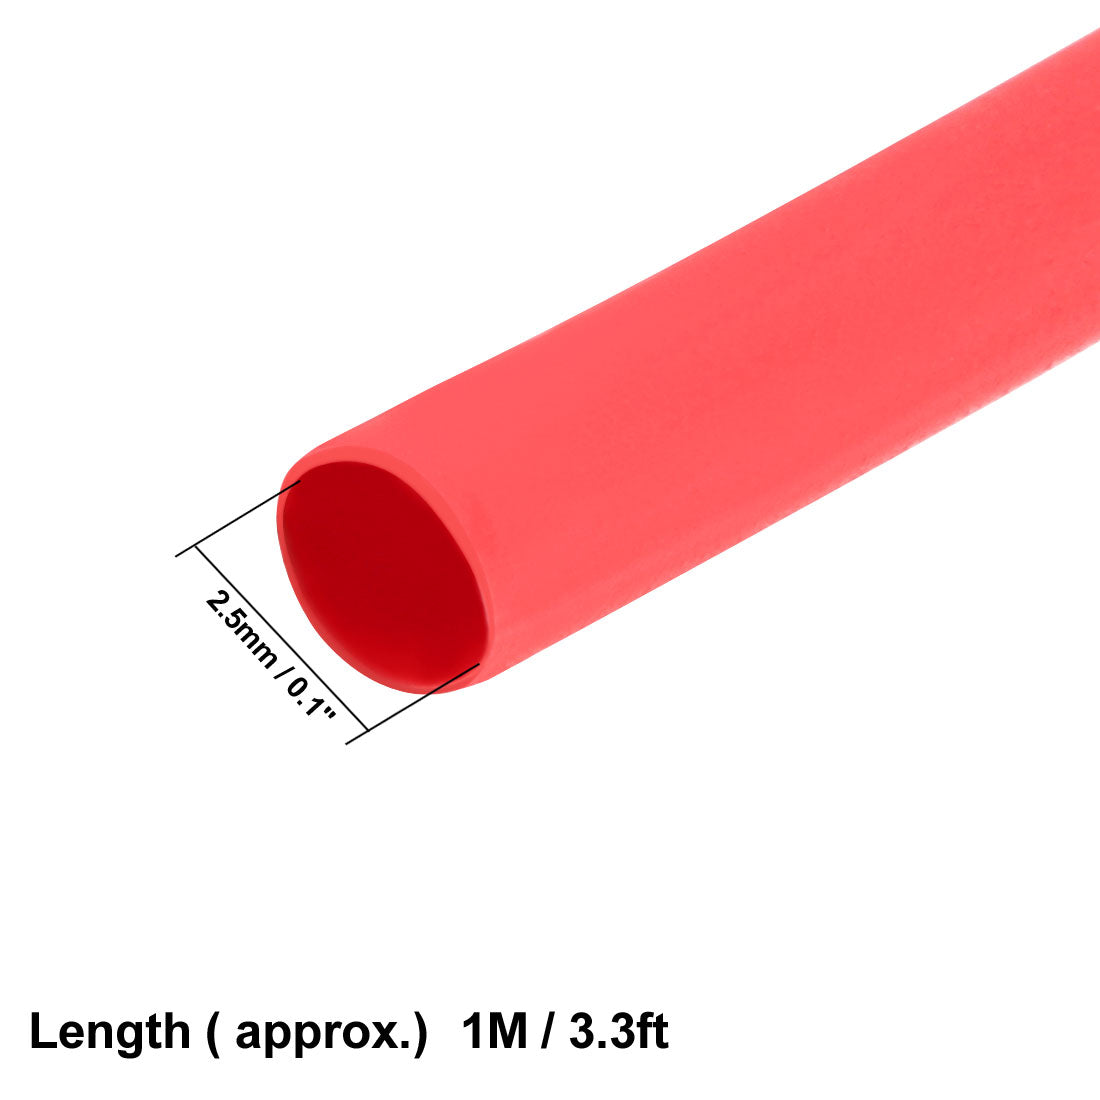 uxcell Uxcell Heat Shrink Tube 2:1 Electrical Insulation Tube Wire Cable Tubing Sleeving Wrap Red 2.5mm Diameter 1m Long